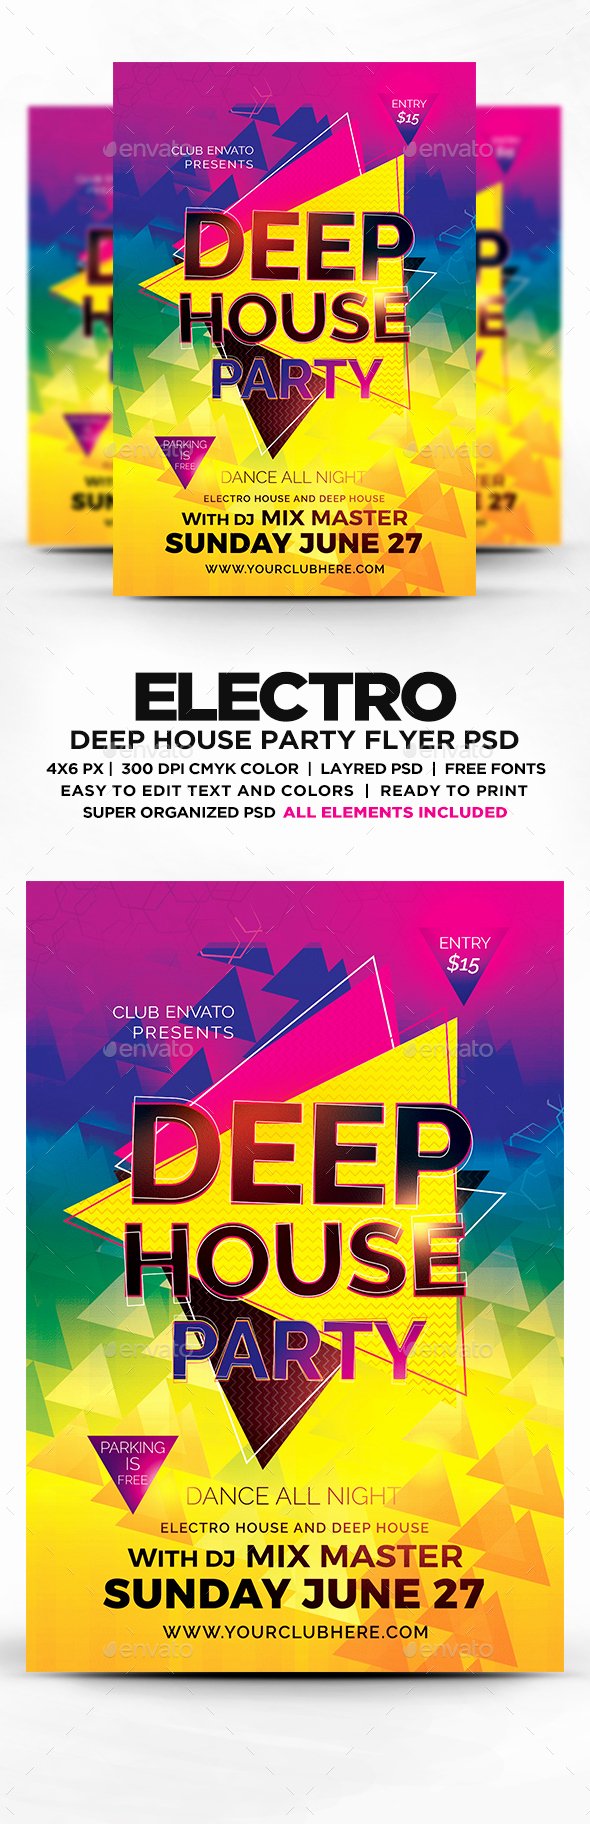 House Party Flyer Template Unique House Party Flyer Template Yourweek Ac57efeca25e